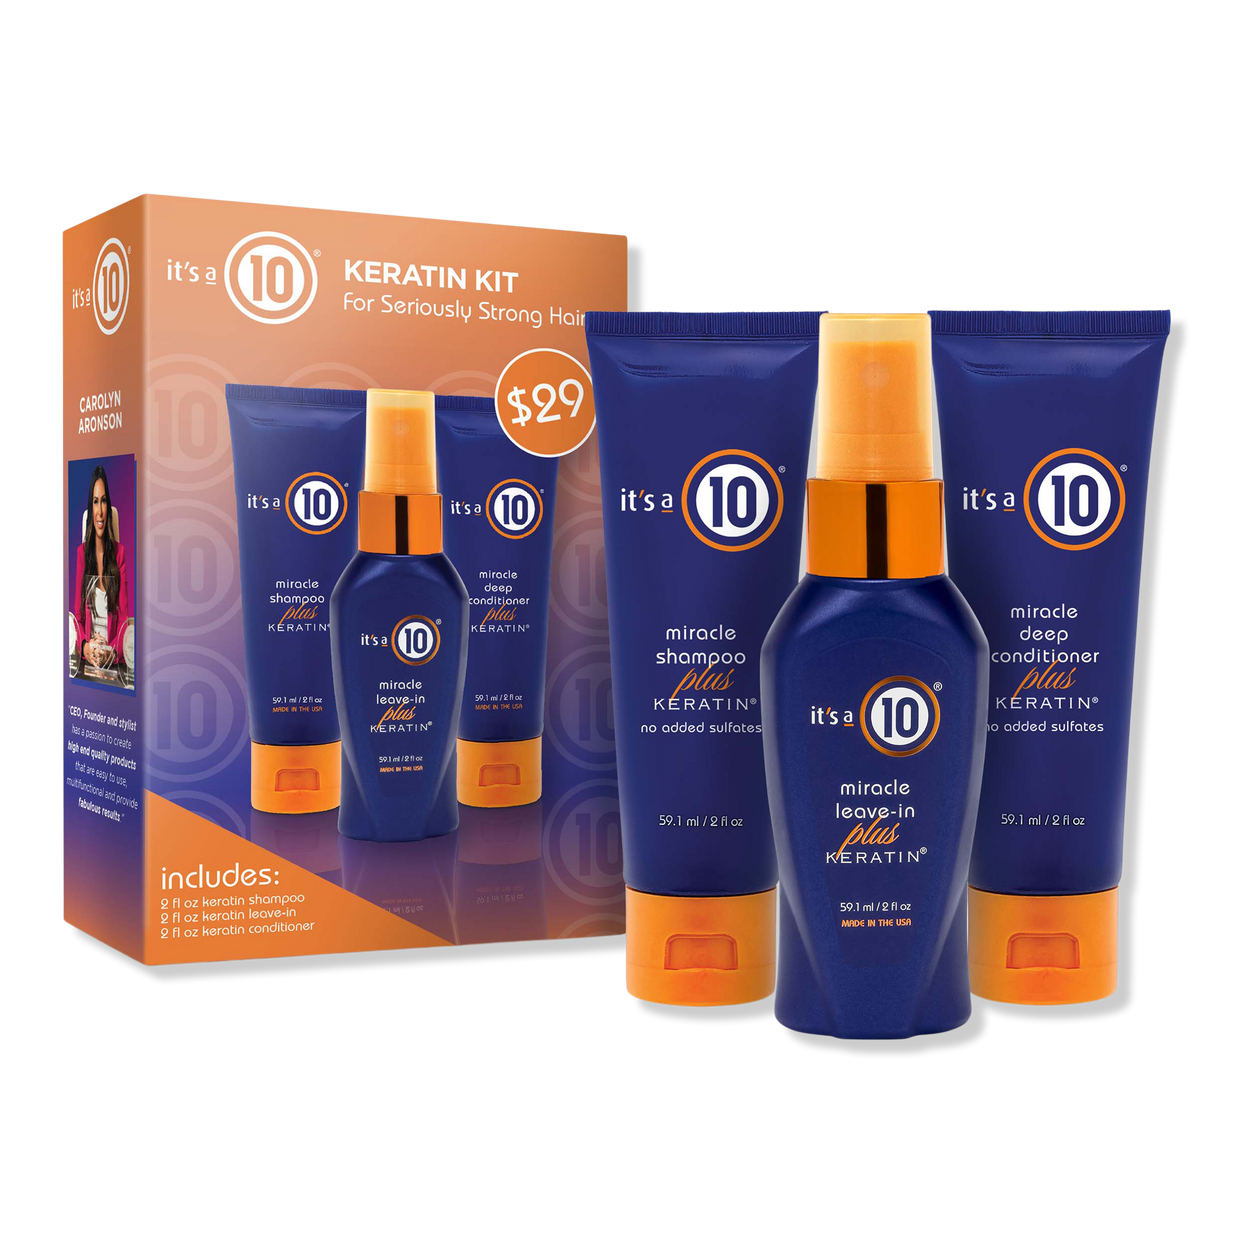 Miracle Shampoo Plus Keratin With 10 Benefits - It's A 10